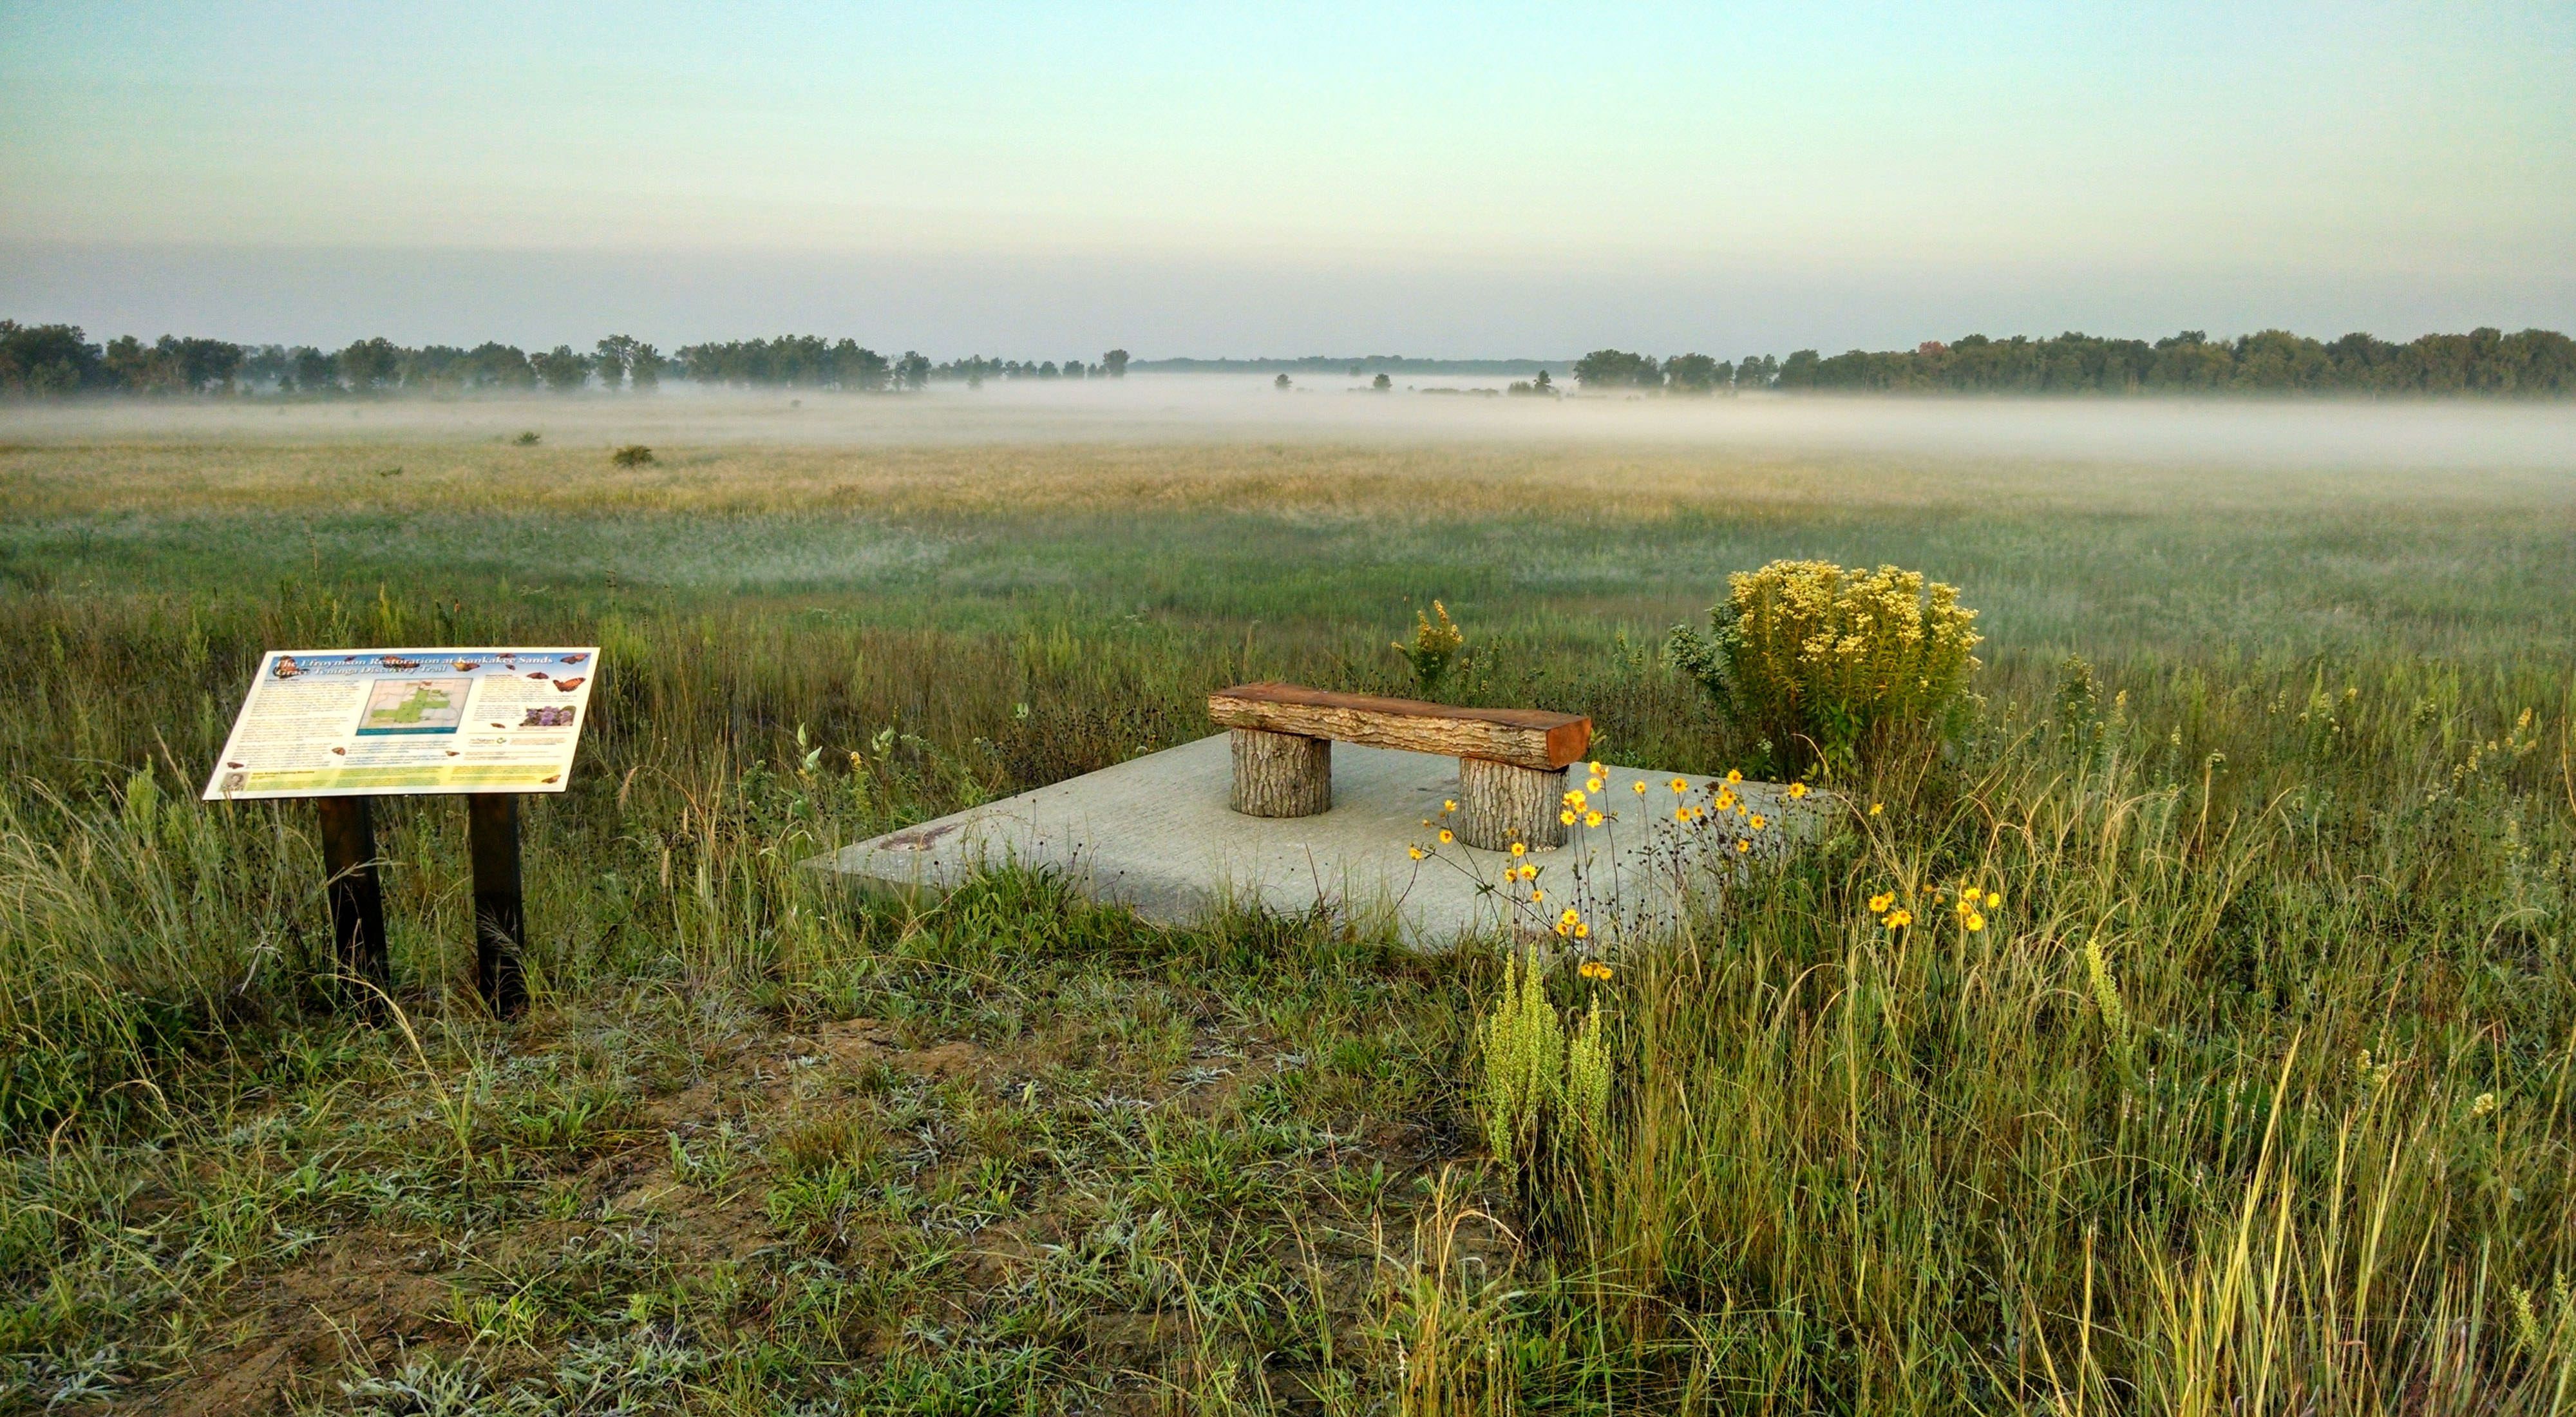 An overlook with signage and a bench looking out onto a misty prairie landscape.